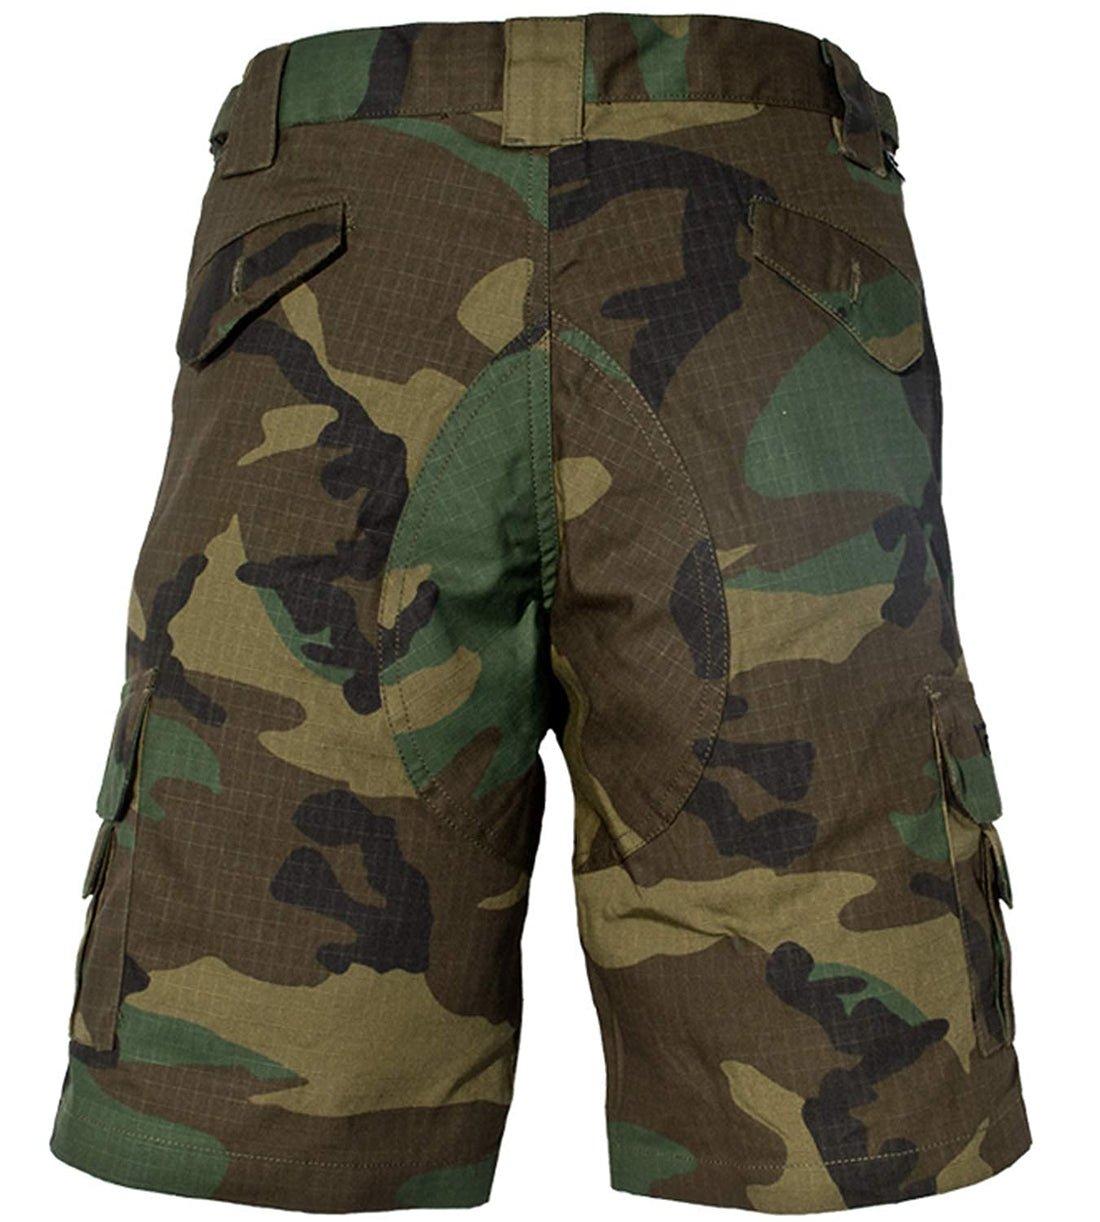 Trendy Apparel Shop Kid's US Soldier Classic Camouflage Tactical Shorts - BDU